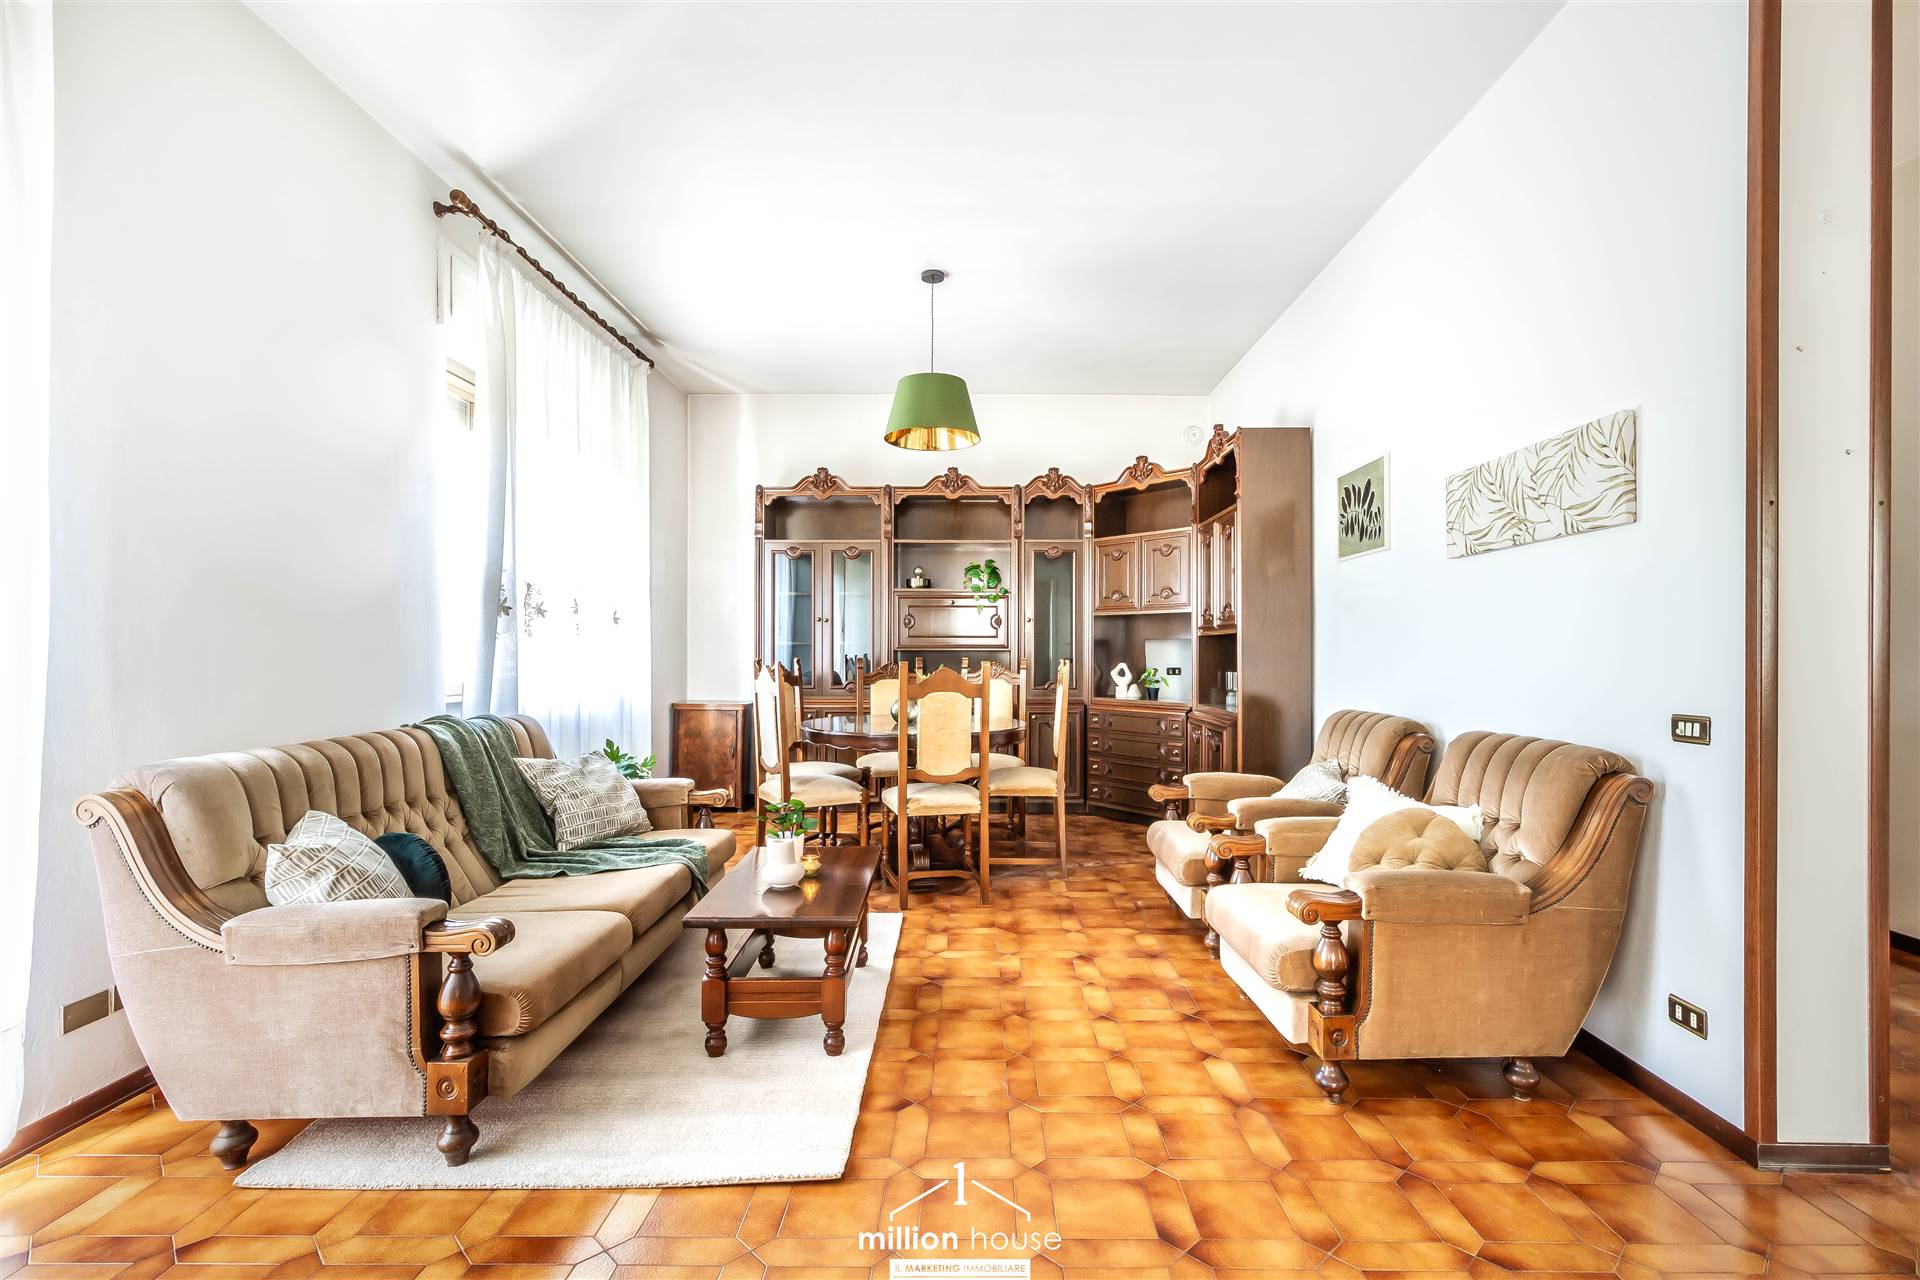 CESANO MADERNO, Apartment for sale of 129 Sq. mt., Habitable, Heating Individual heating system, Energetic class: G, placed at 1°, composed by: 3 